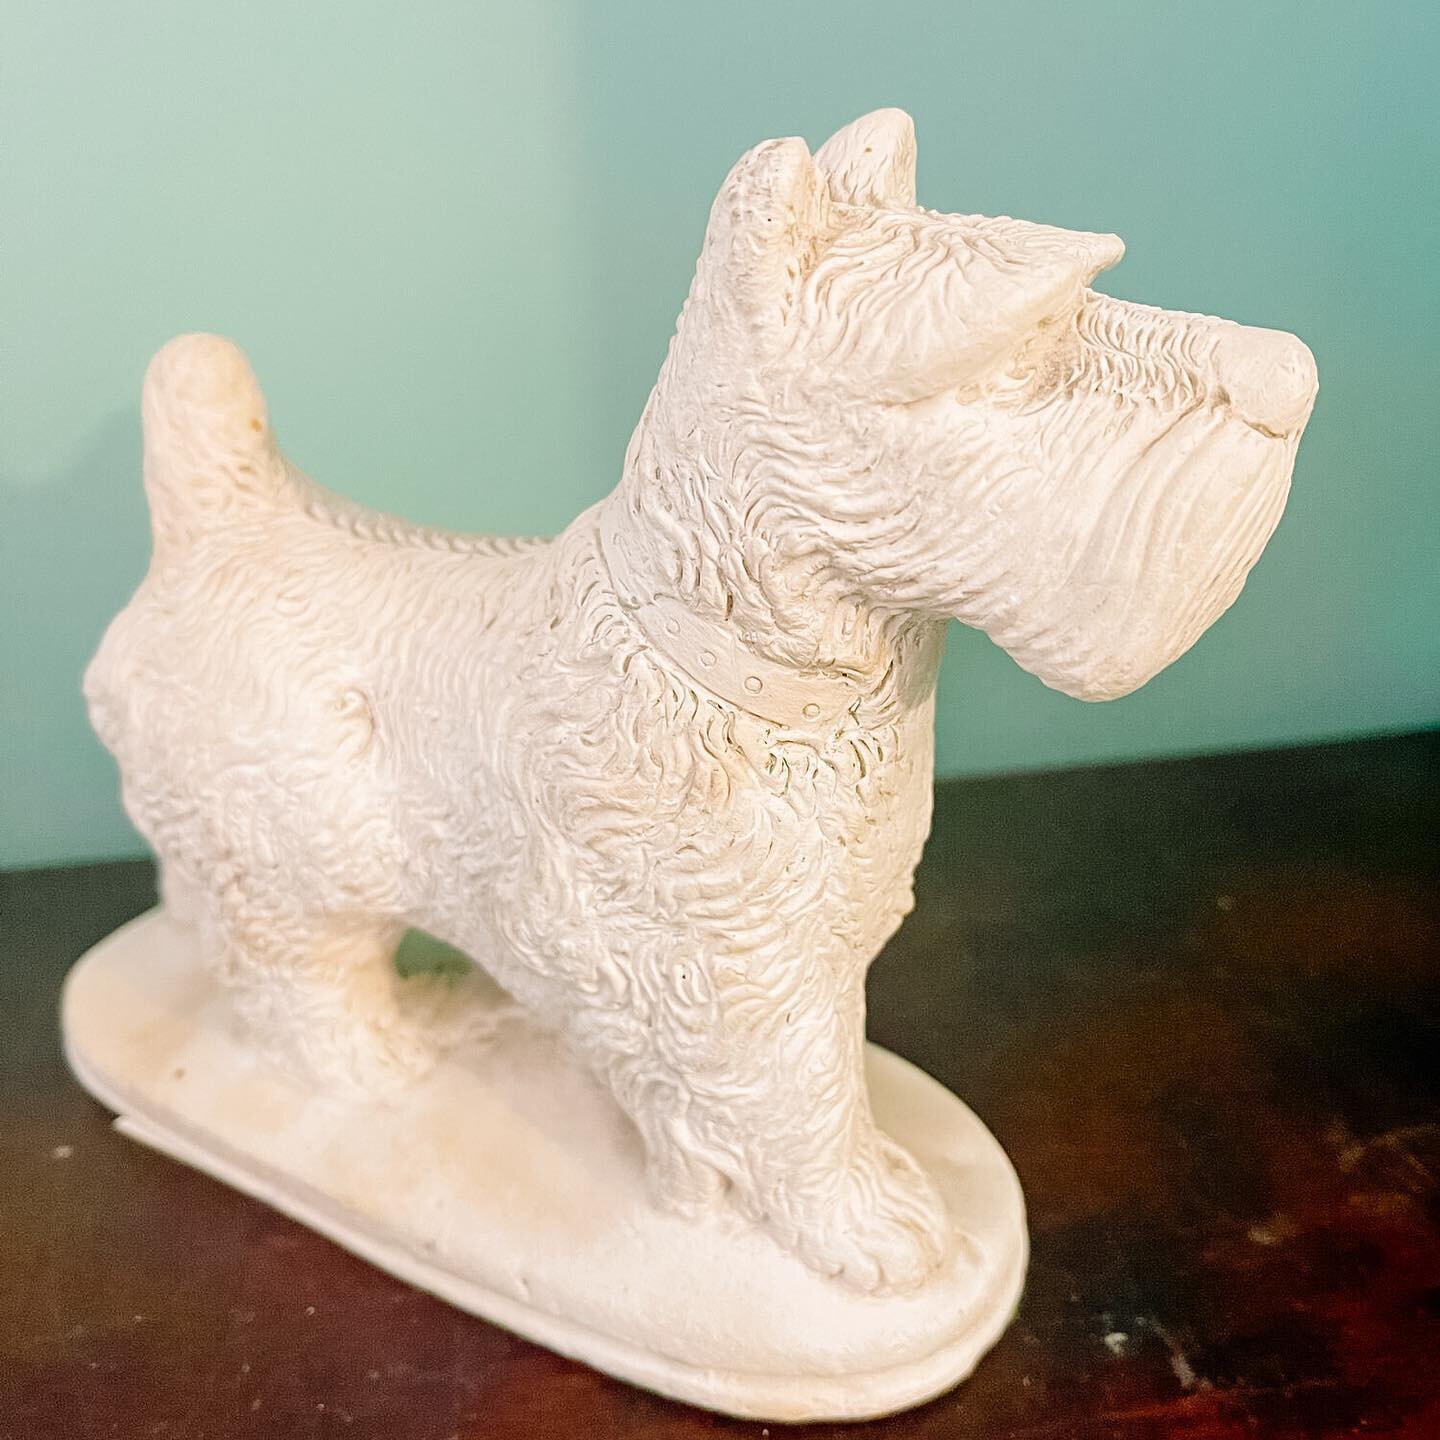 This sweet pup is waiting on his forever home. He's in our shop for $15, plus shipping. He was made by the White Sands plaster company in the late 1930s and is the sweetest little thing. Link in bio. 💖